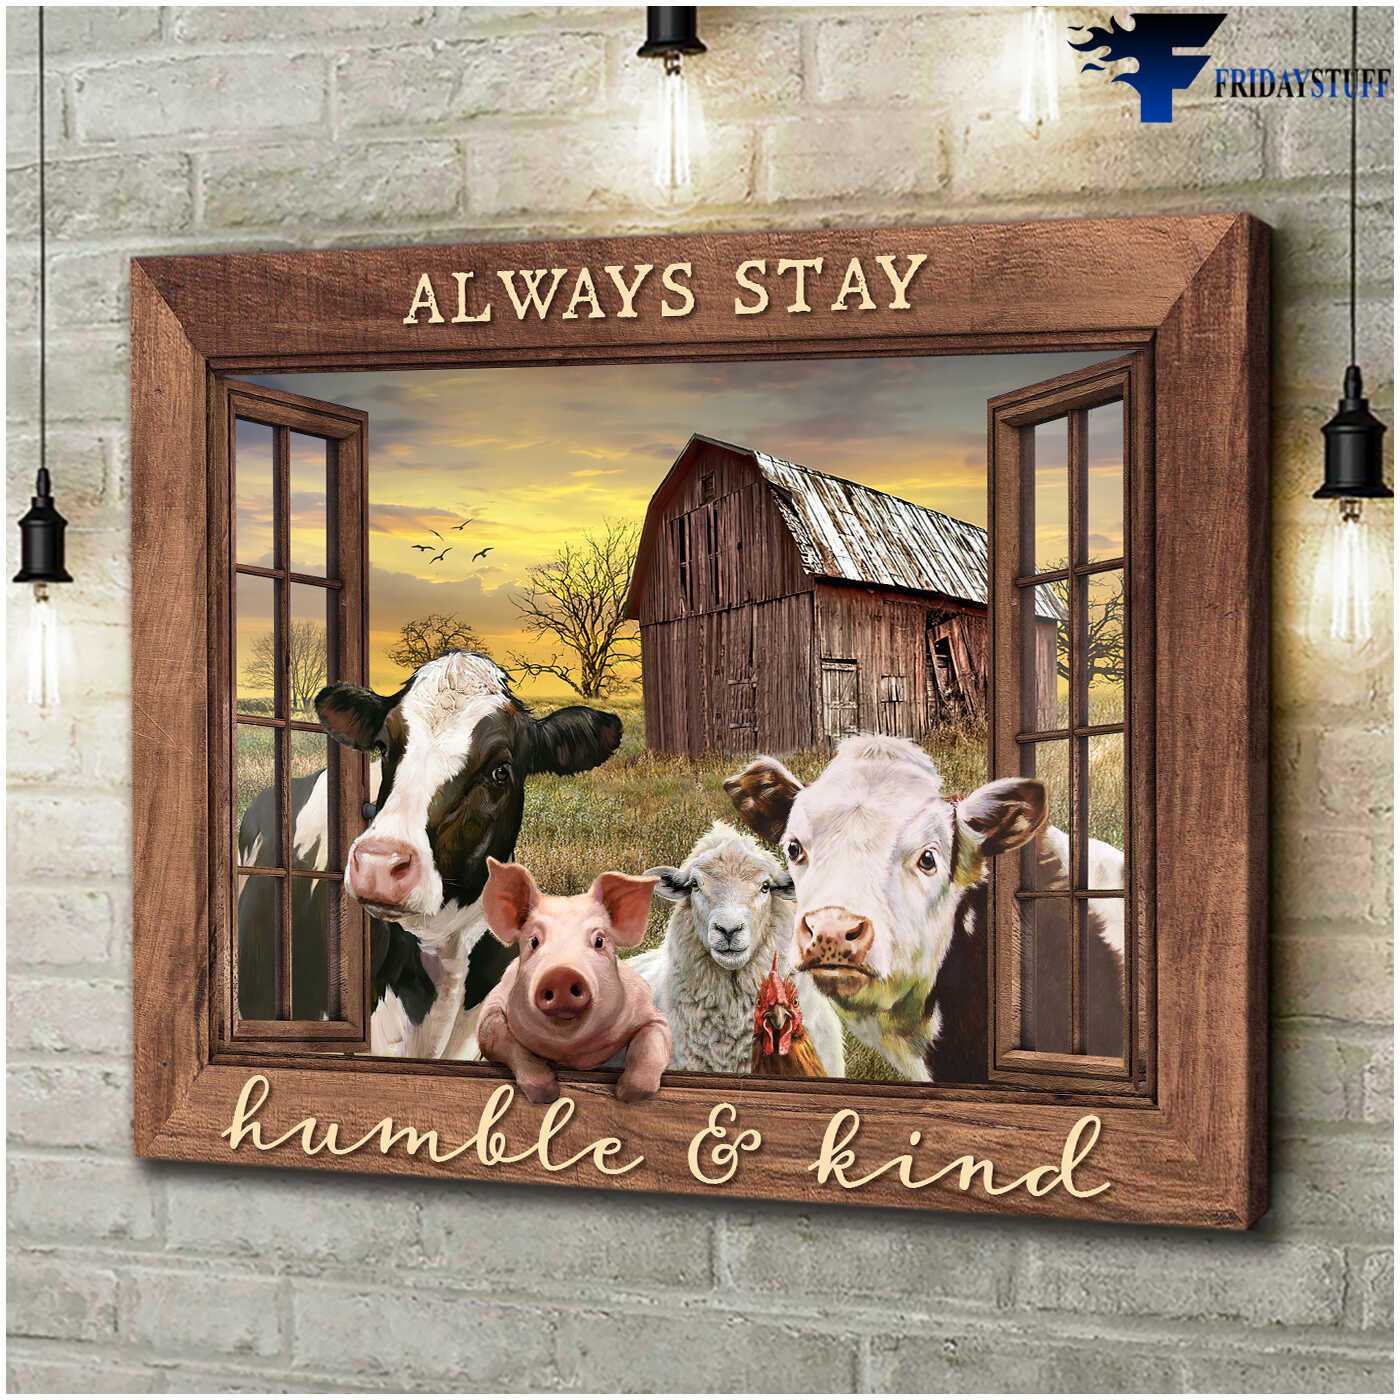 Farmer Poster - Always Stay Humble And Kind, Dairy Cow, Pig, Sheep